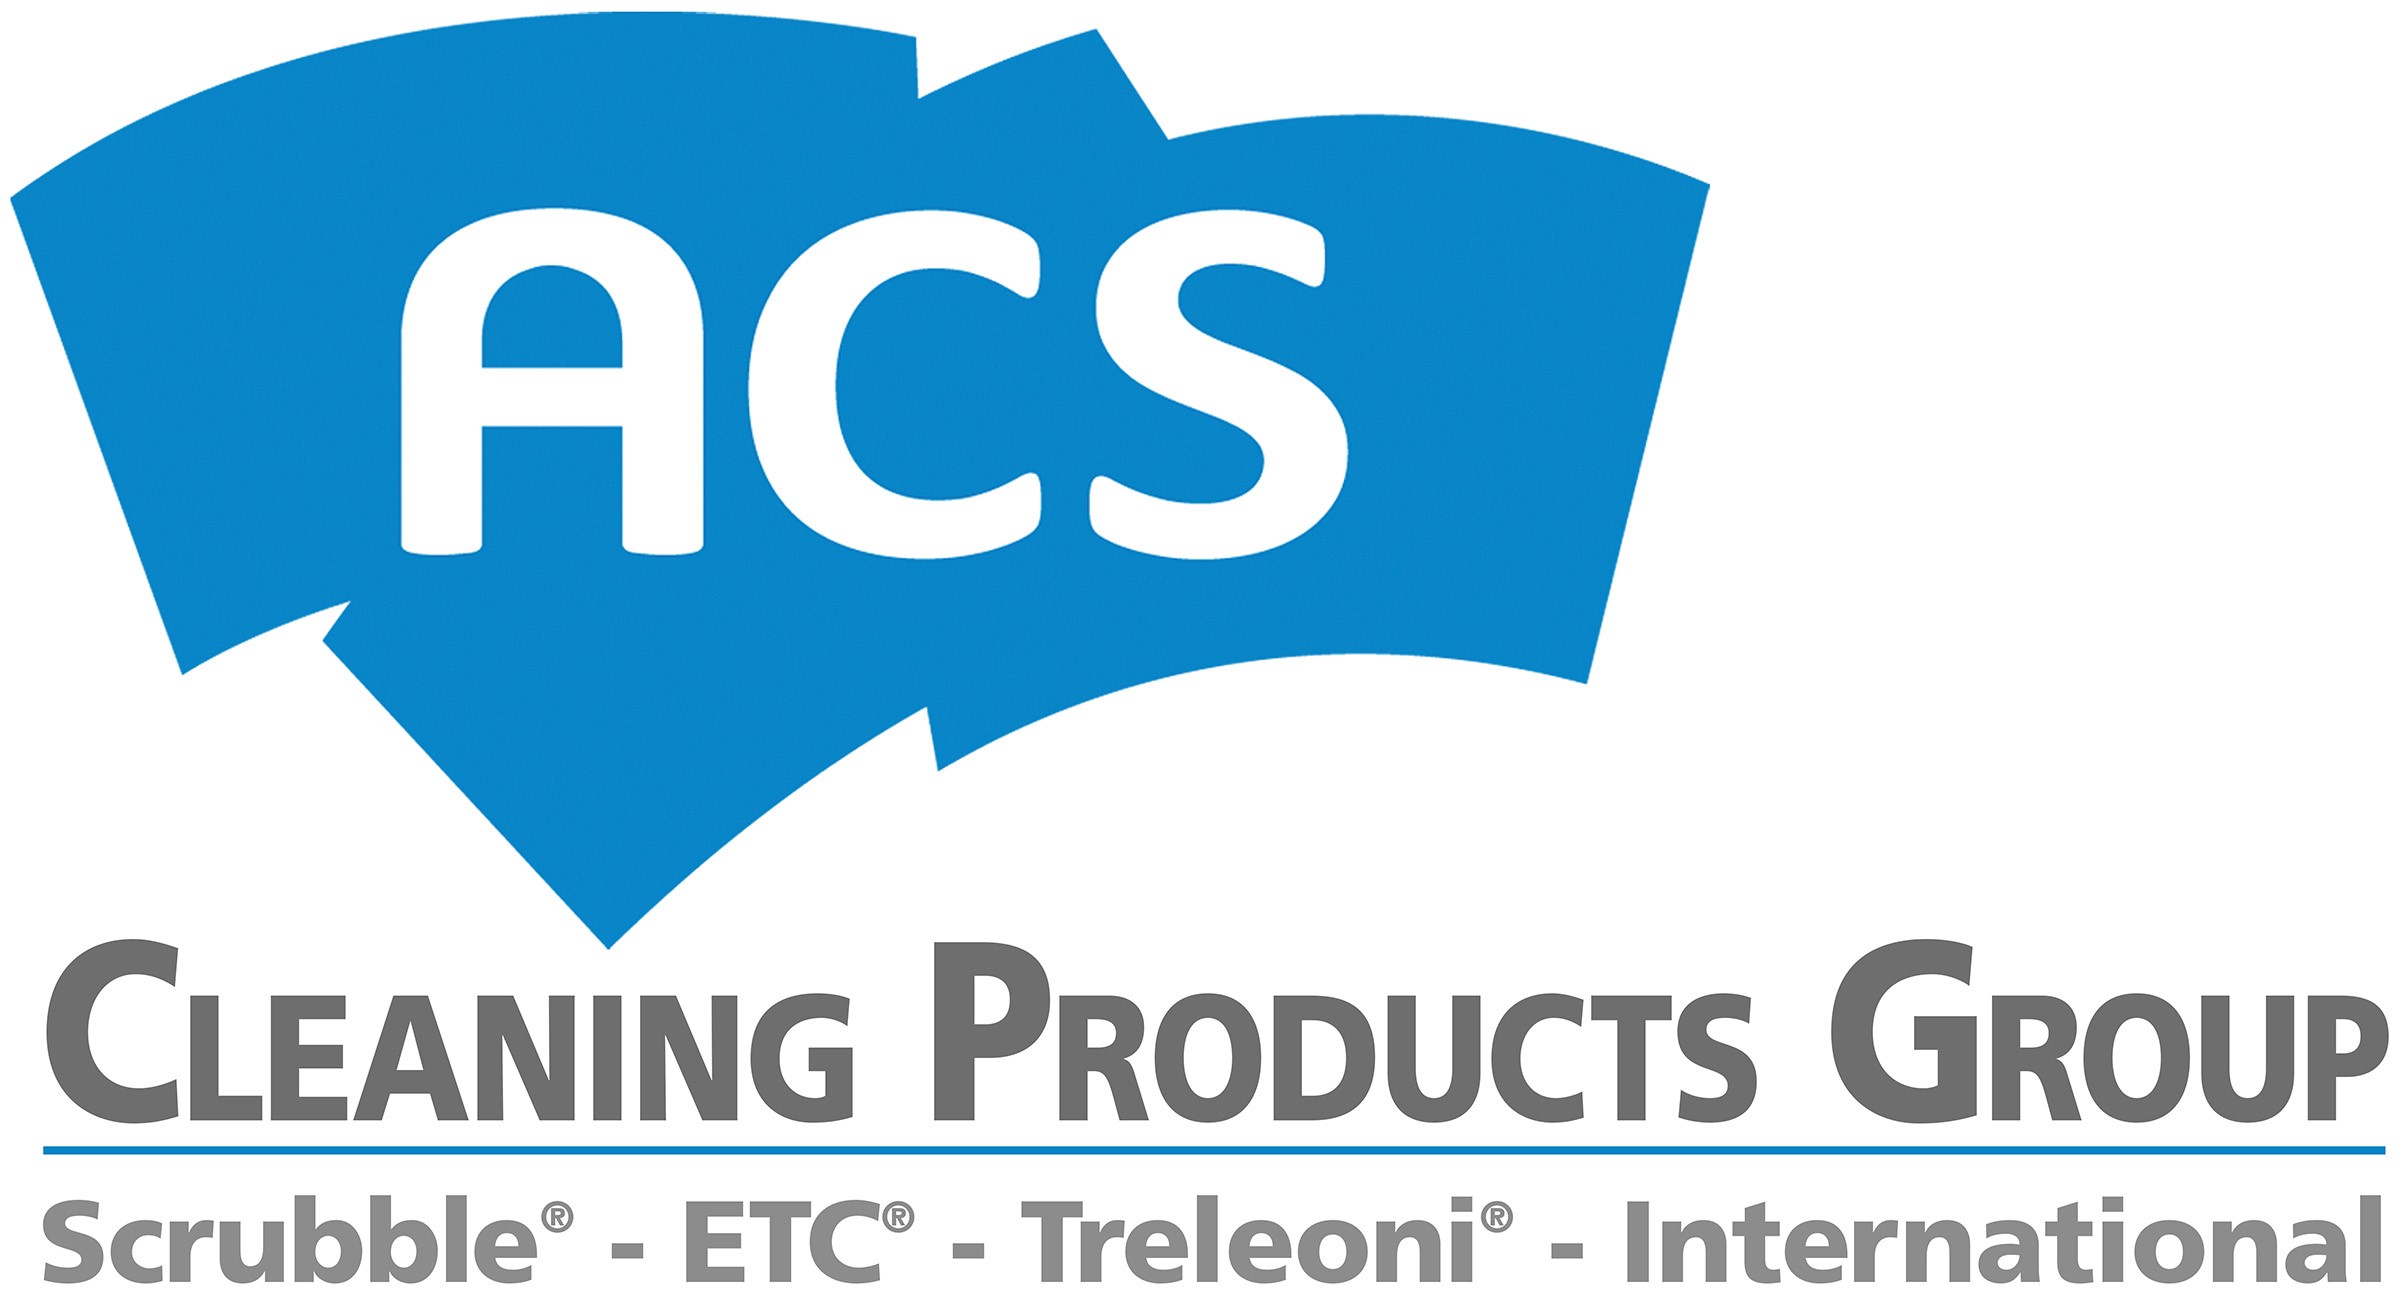 ACS Cleaning Products